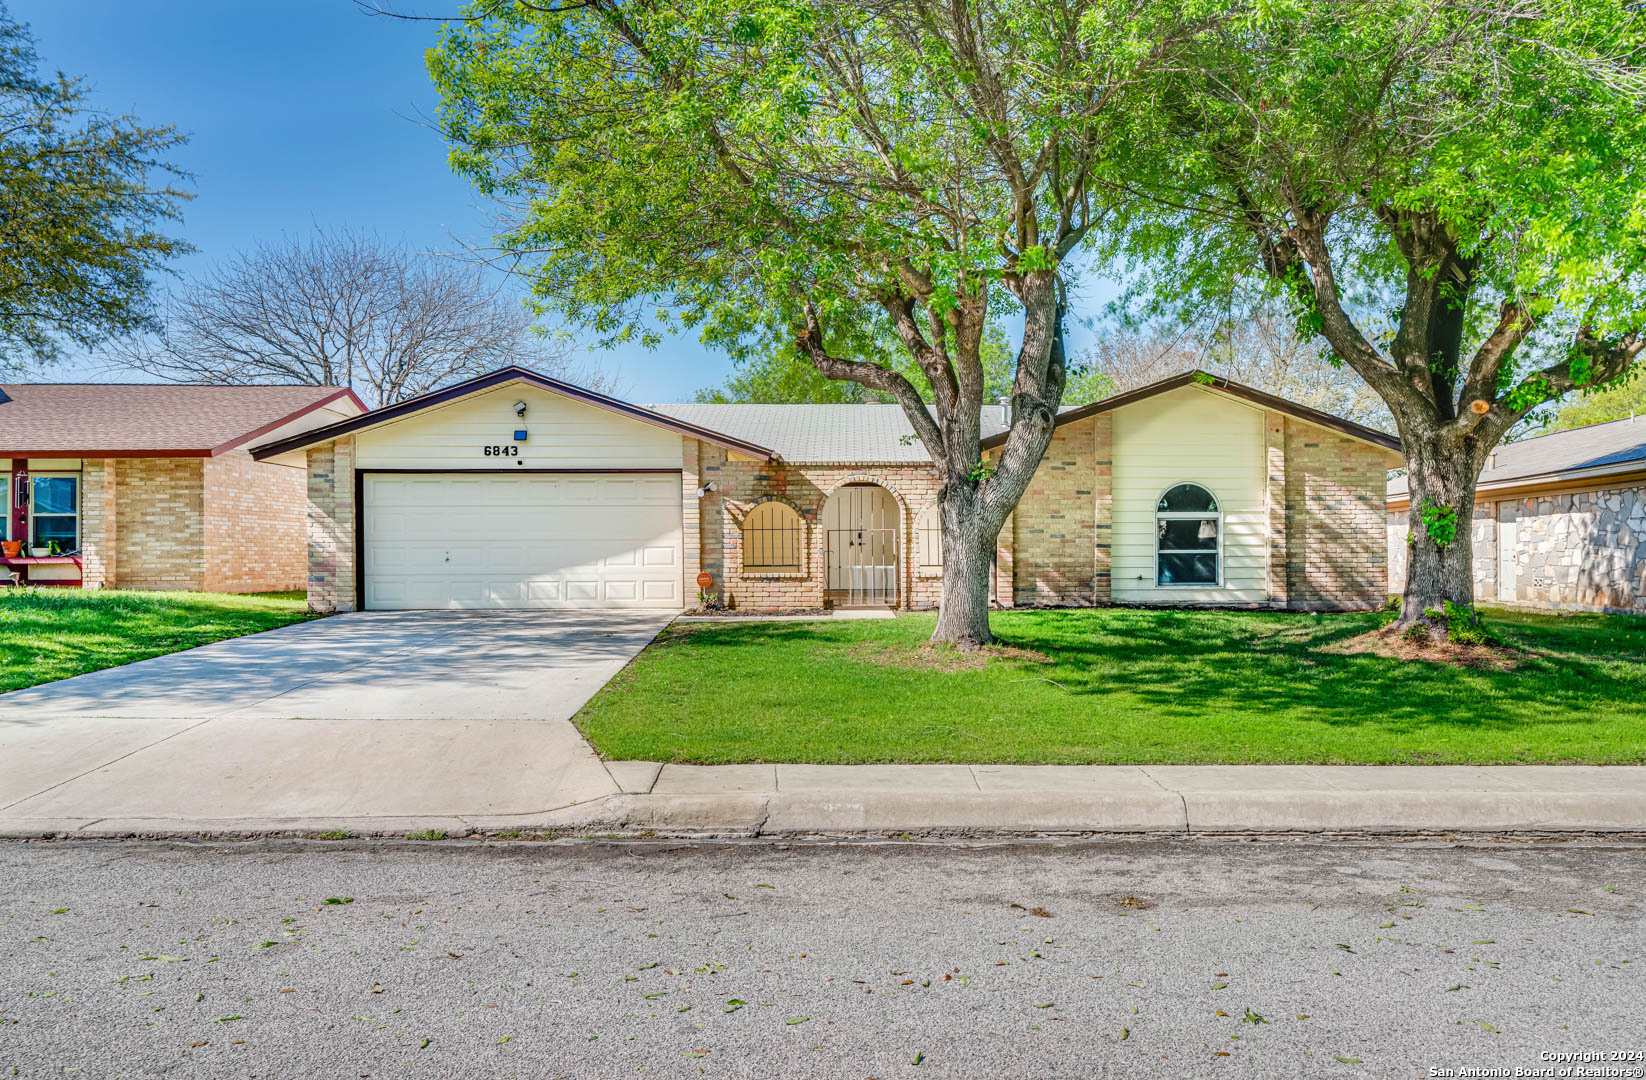 Photo of 6843 Mickey Mantle Dr in San Antonio, TX